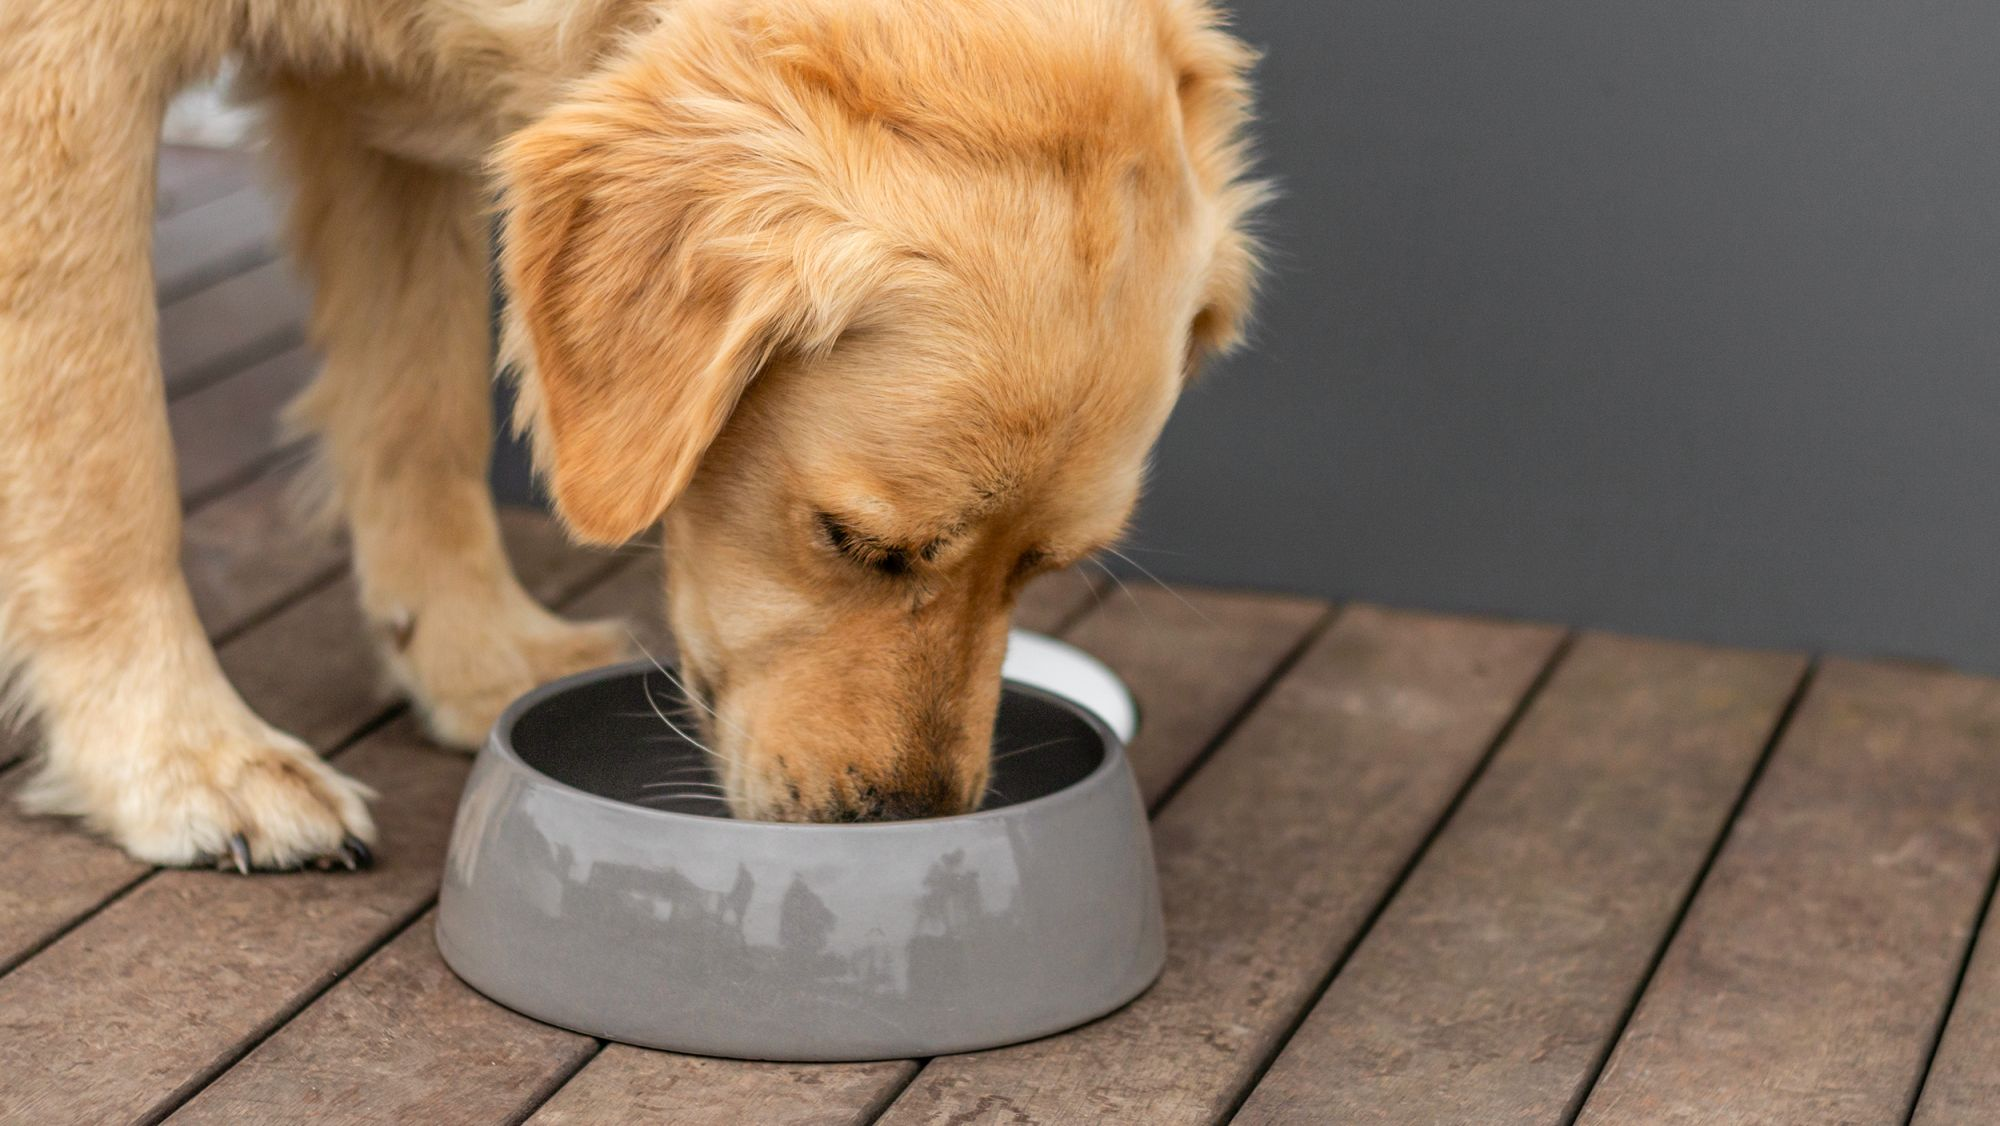 Golden Retriever adult standing outdoors eating from a grey bowl.